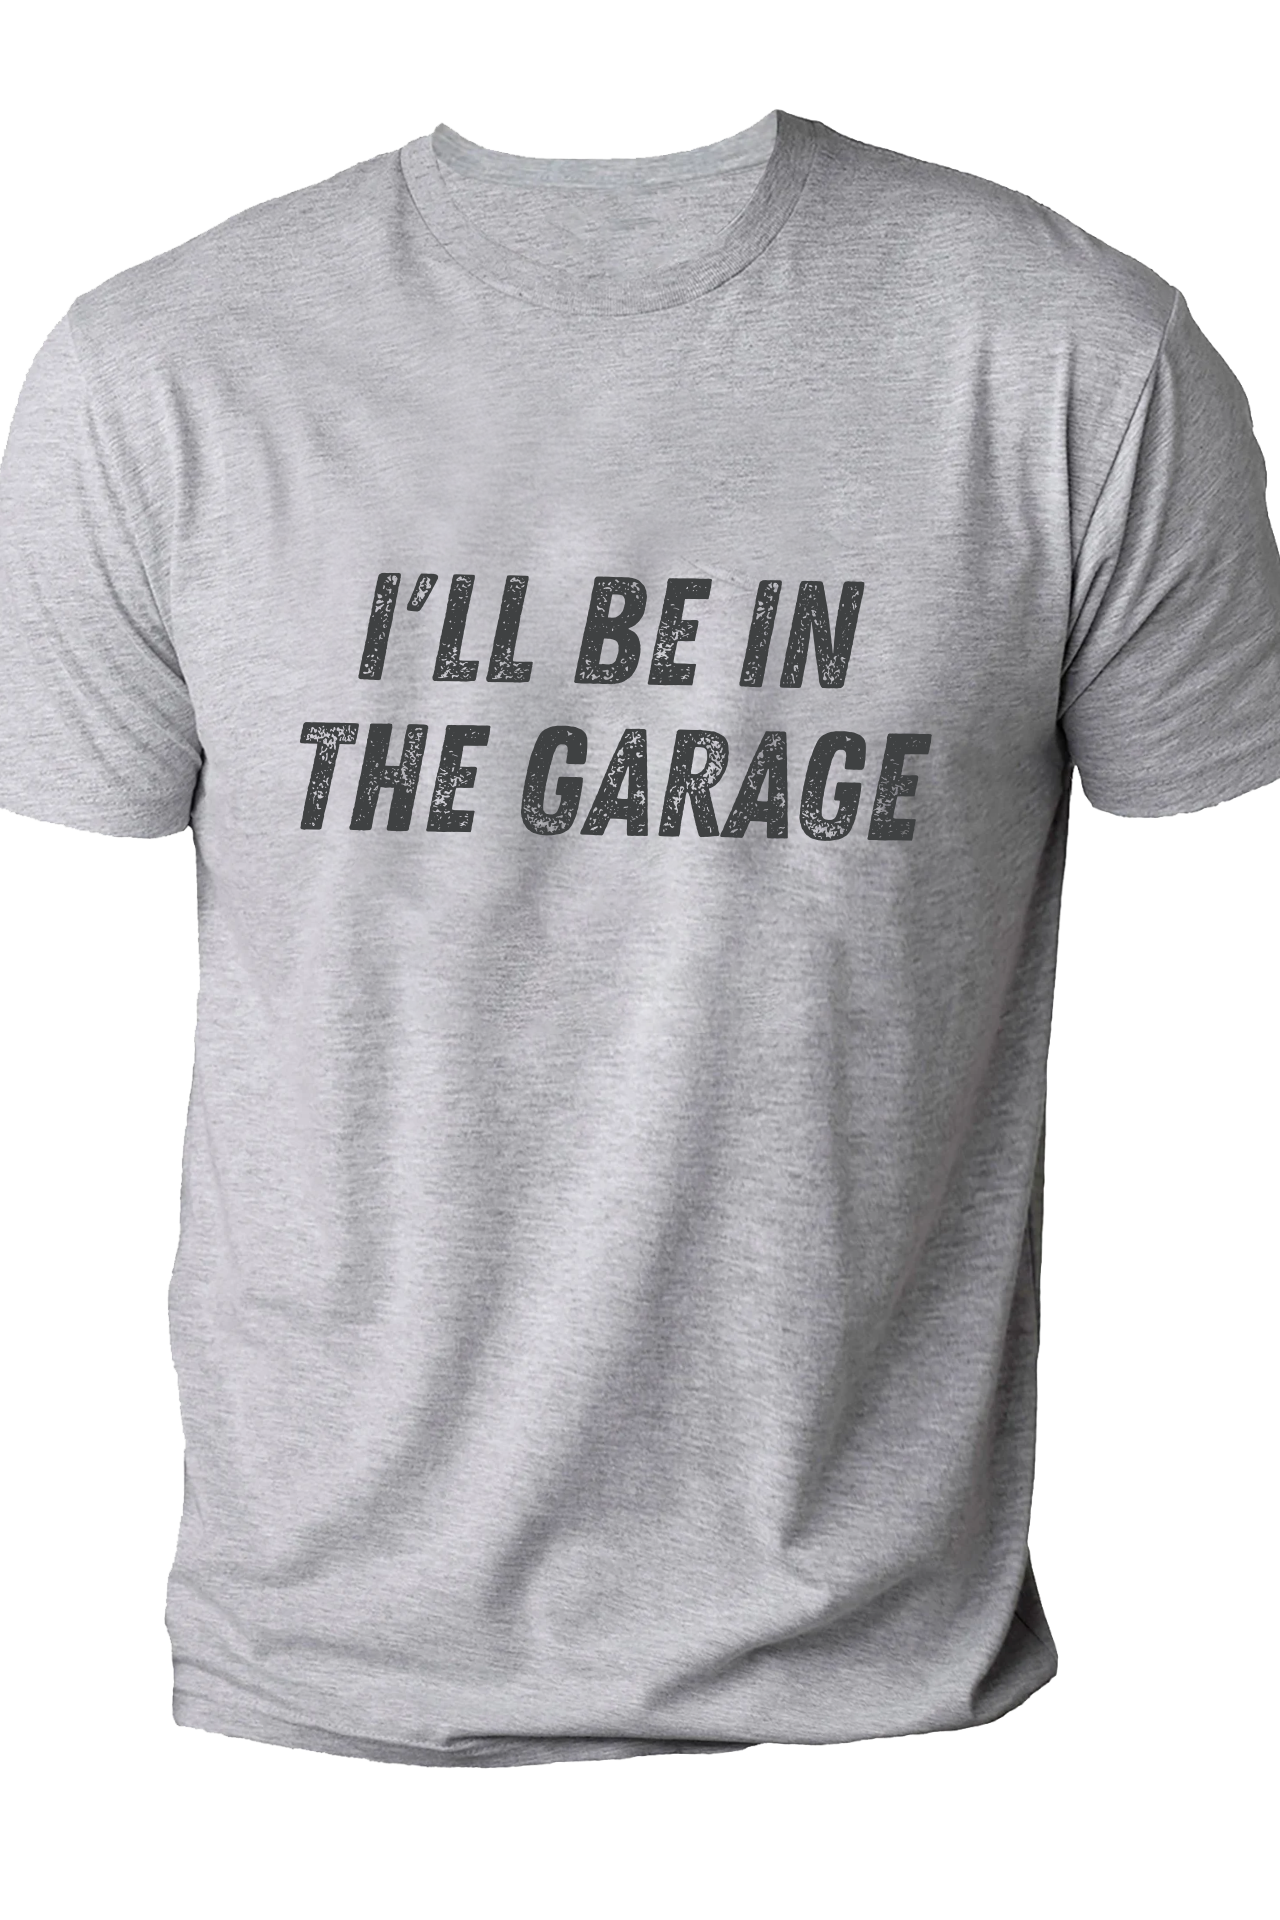 I'll be in the Garage Tshirt